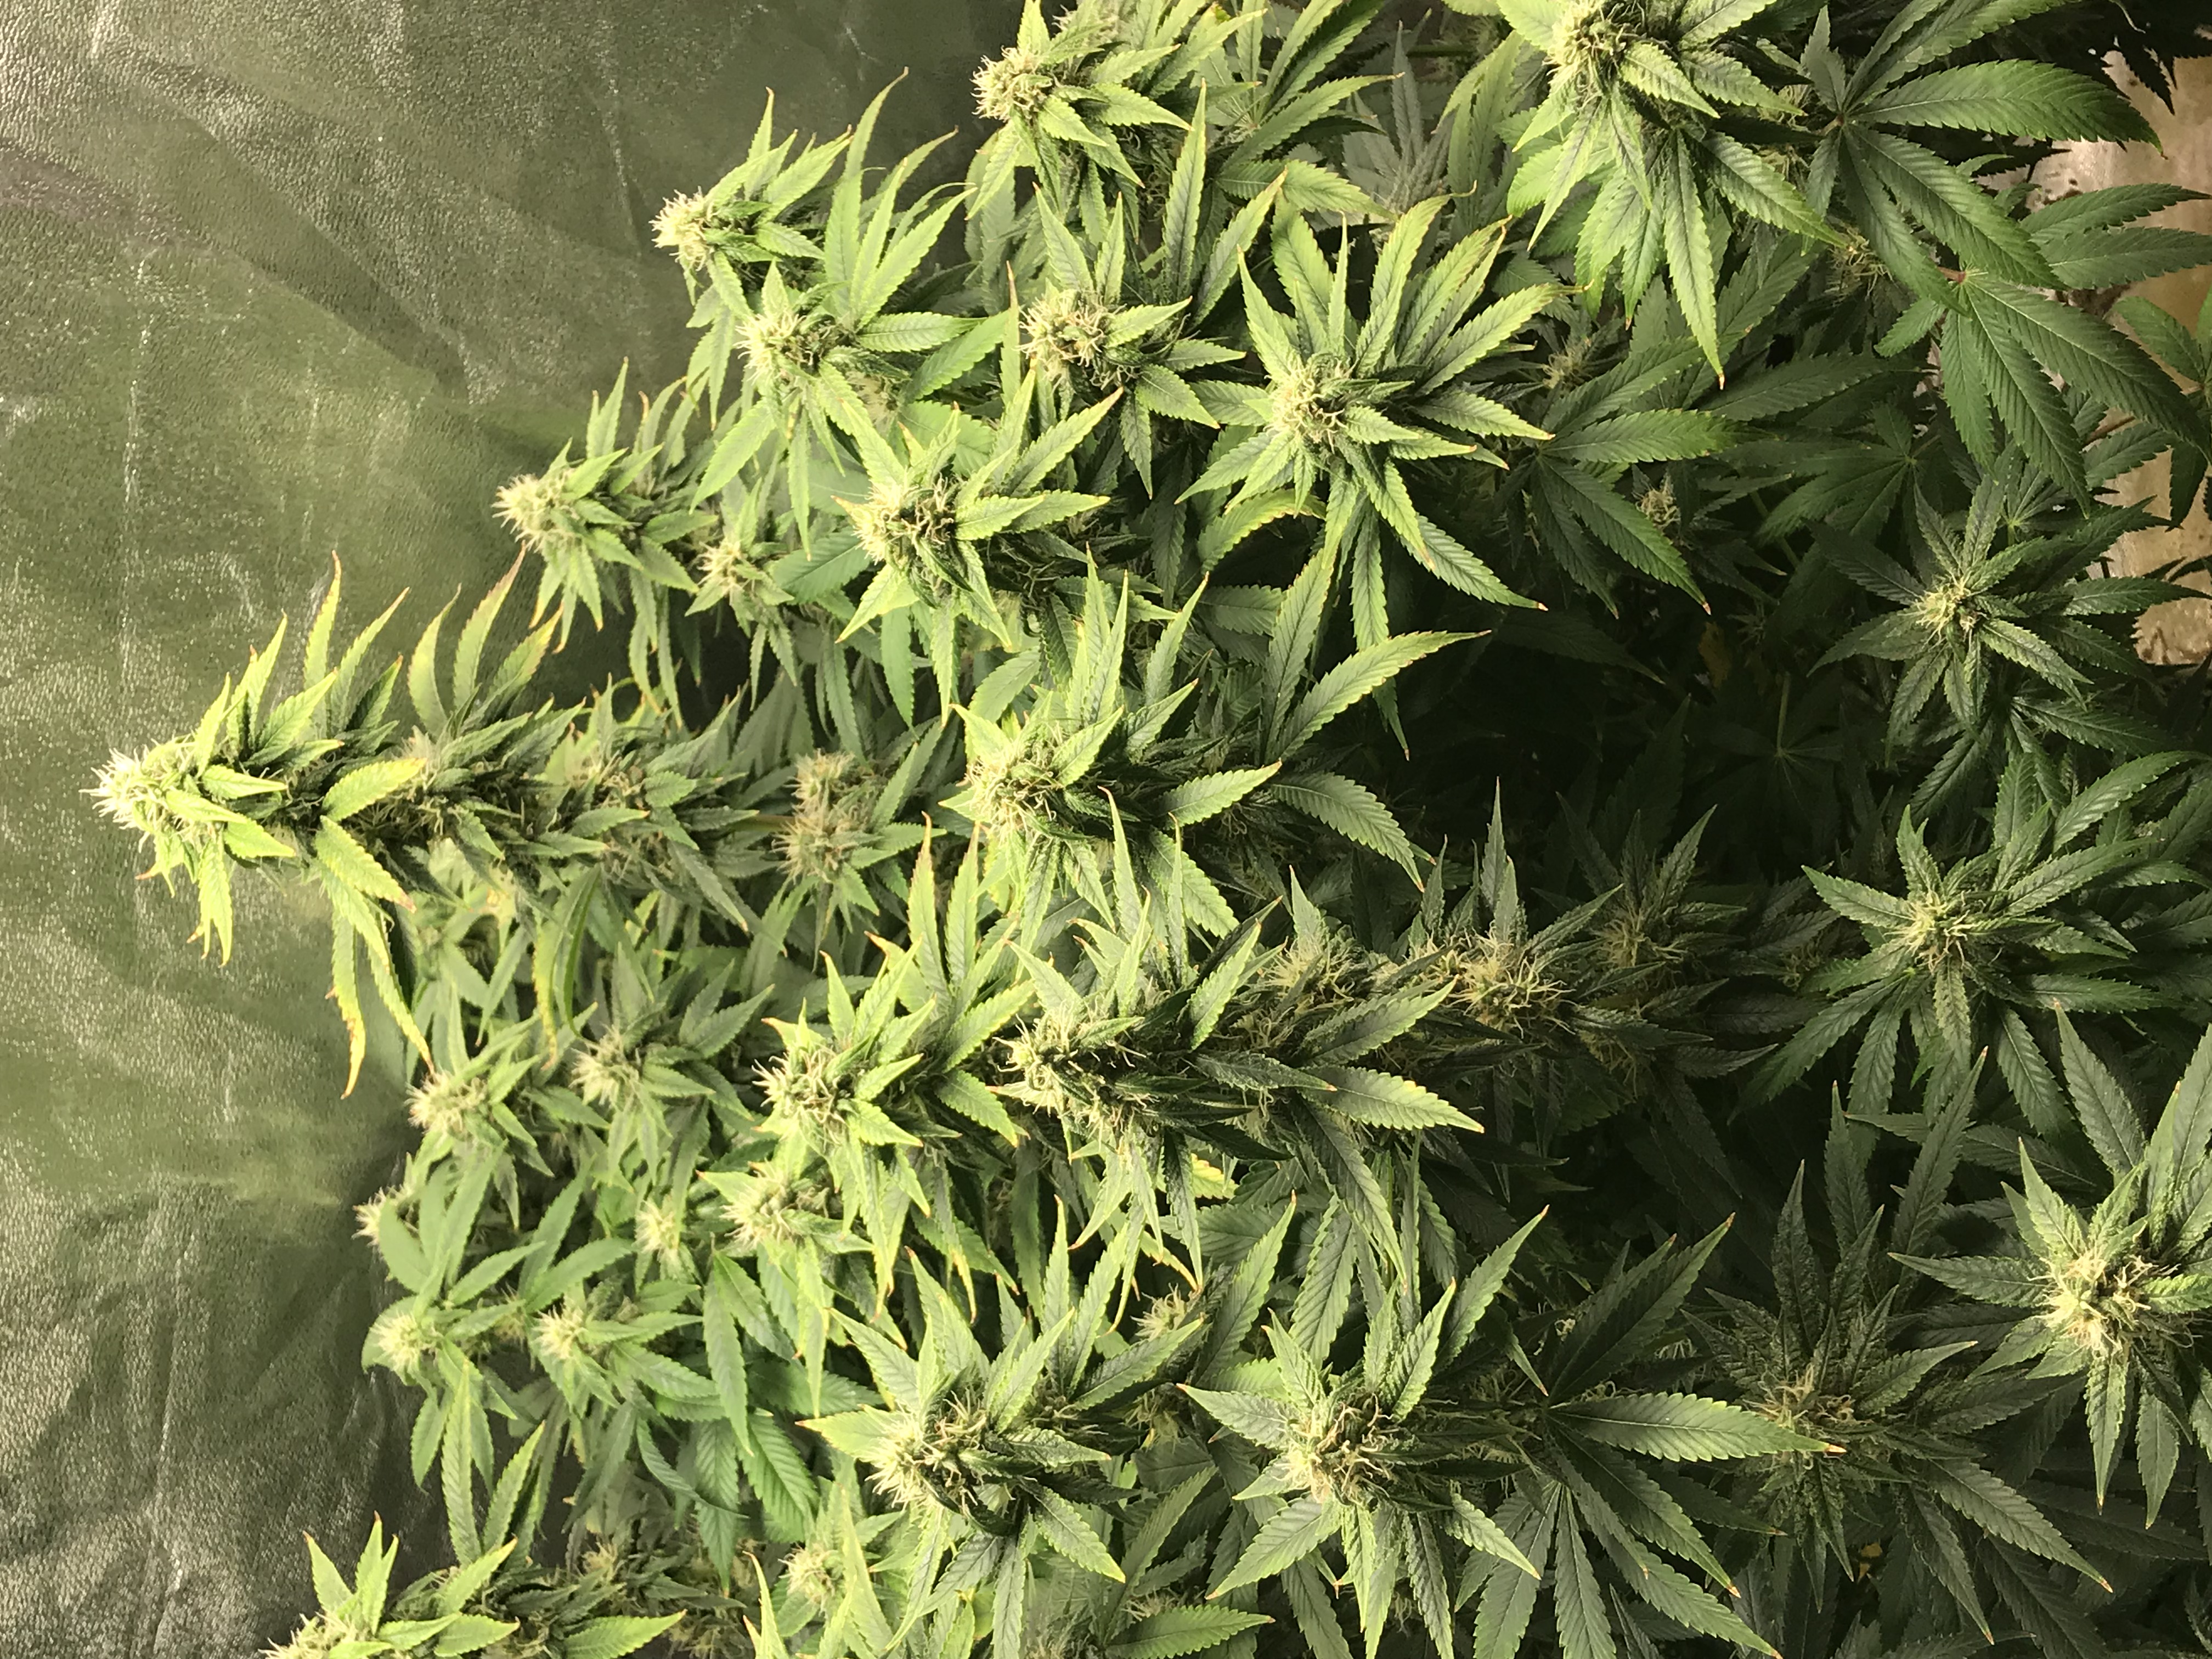 Larger lady with smaller bud sites 